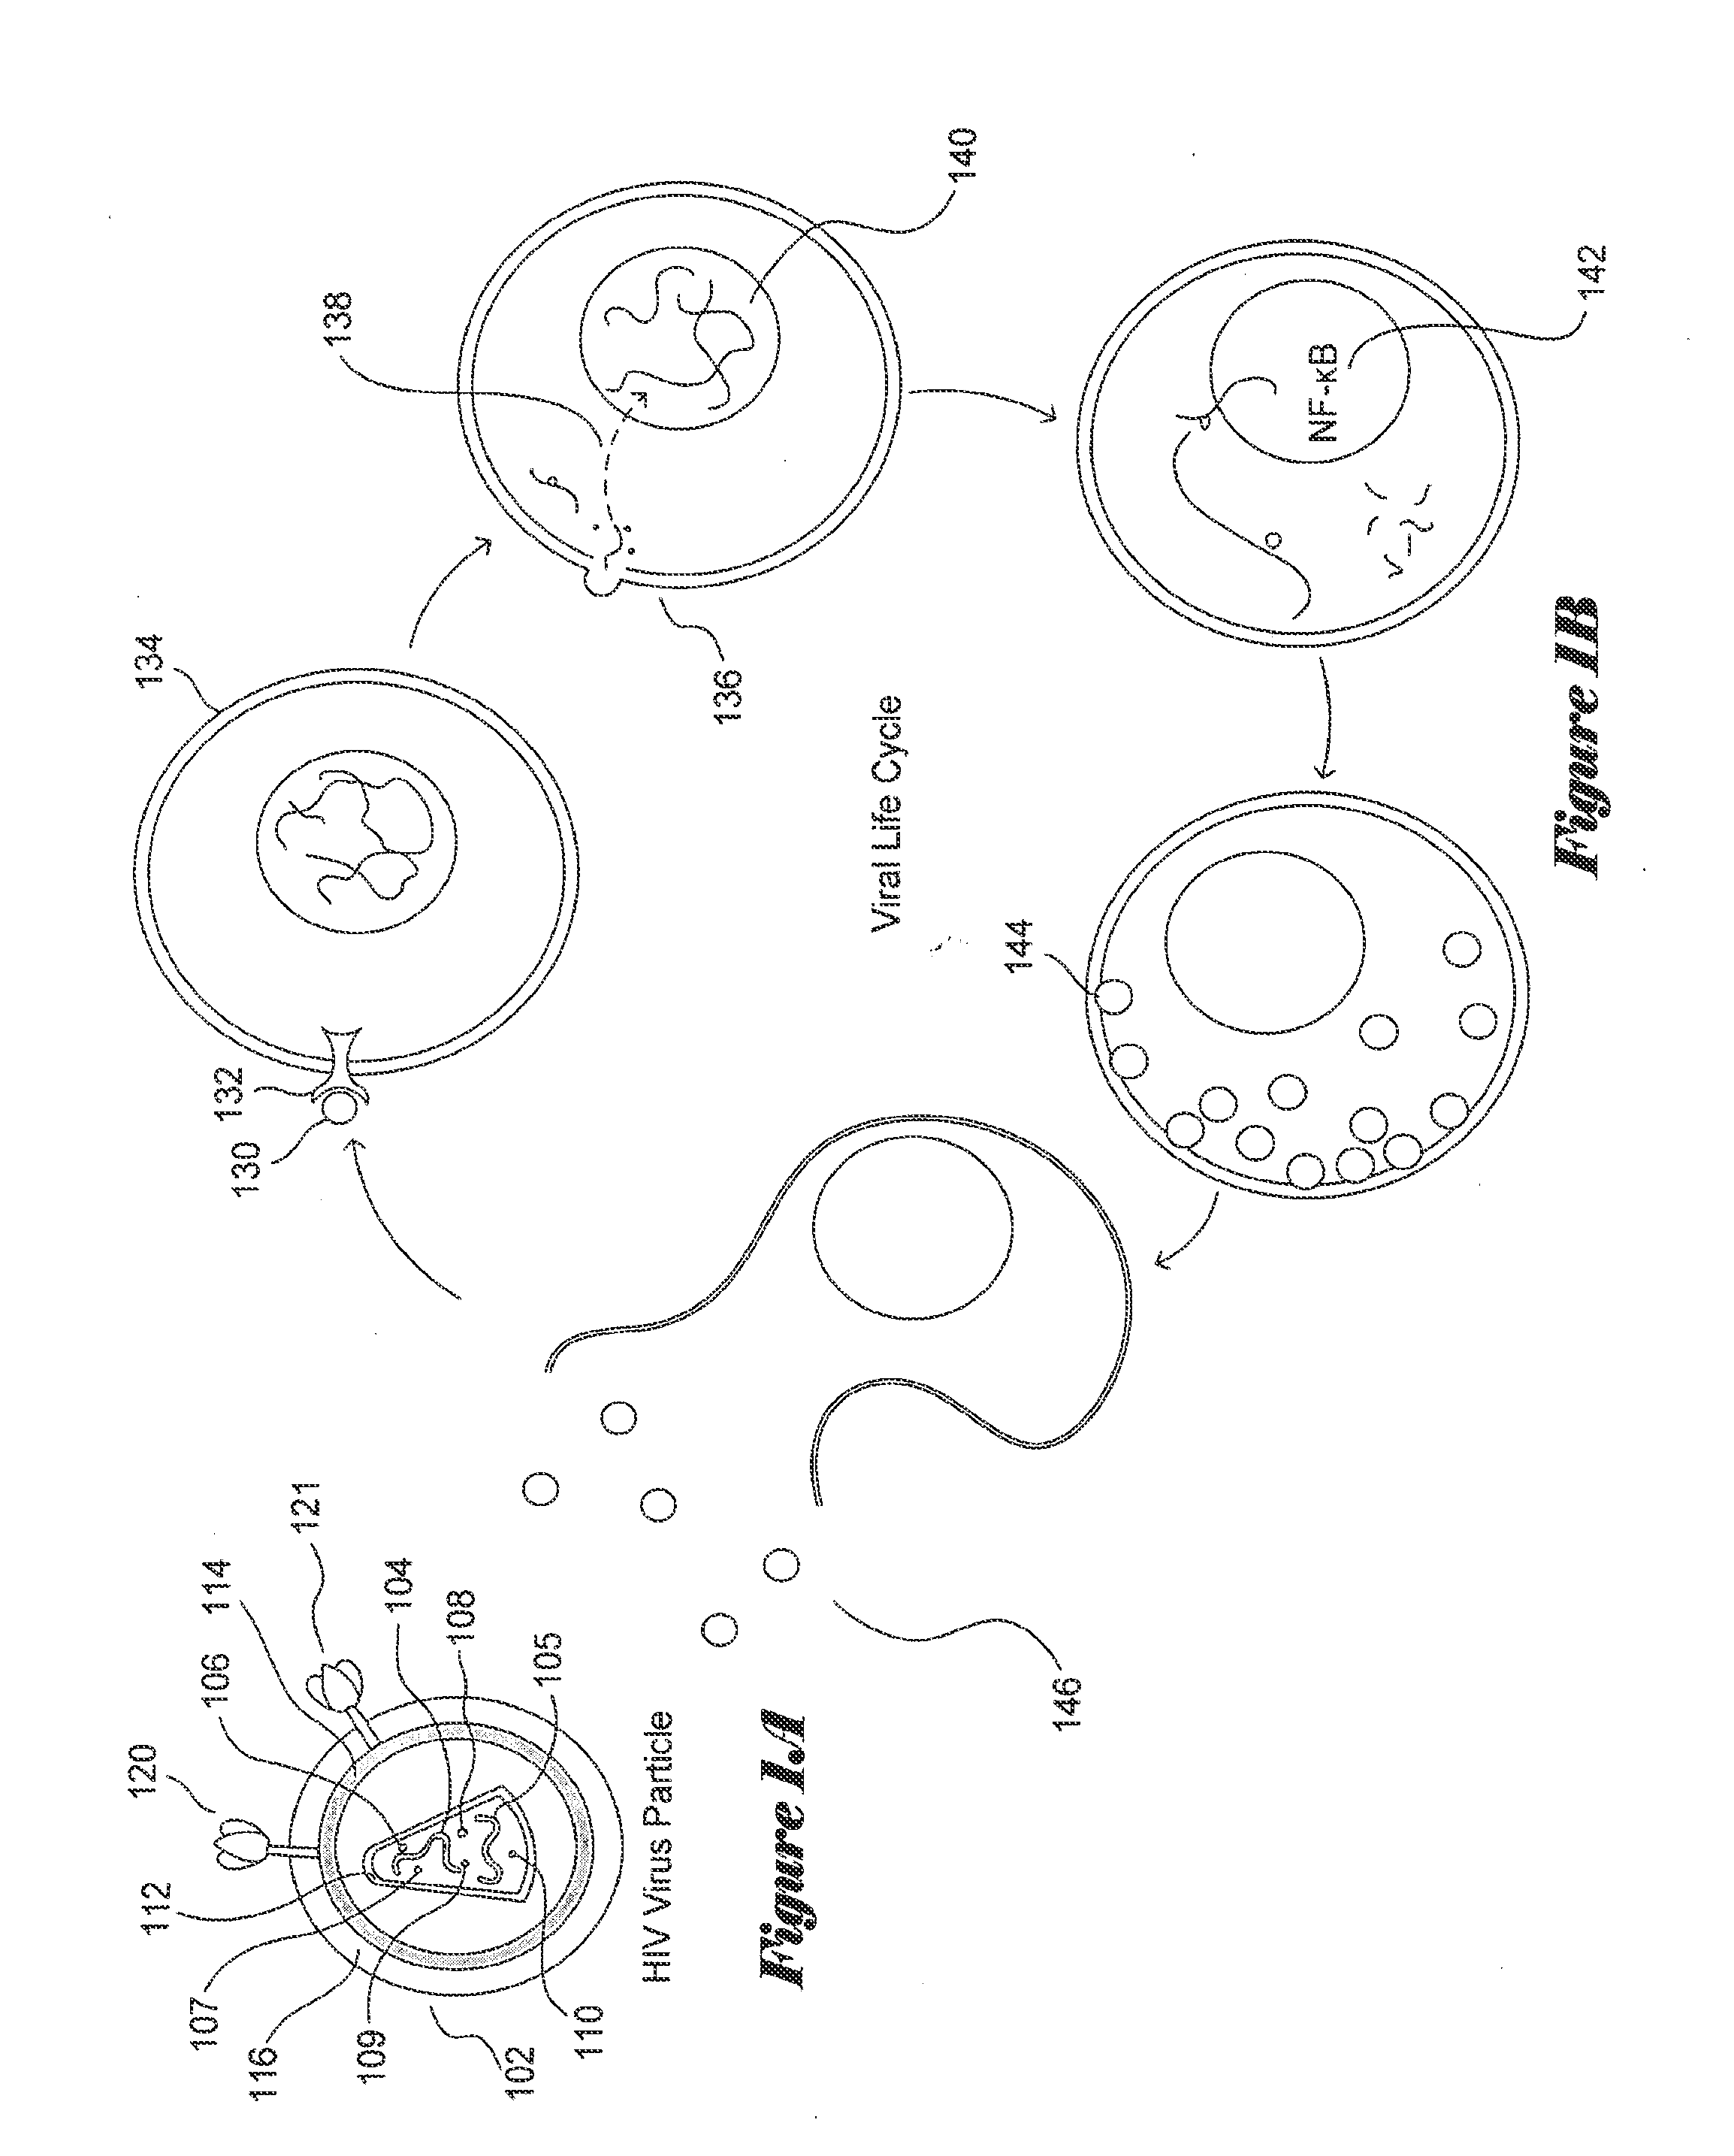 Conserved-Element Vaccines and Methods for Designing Conserved-Element Vaccines